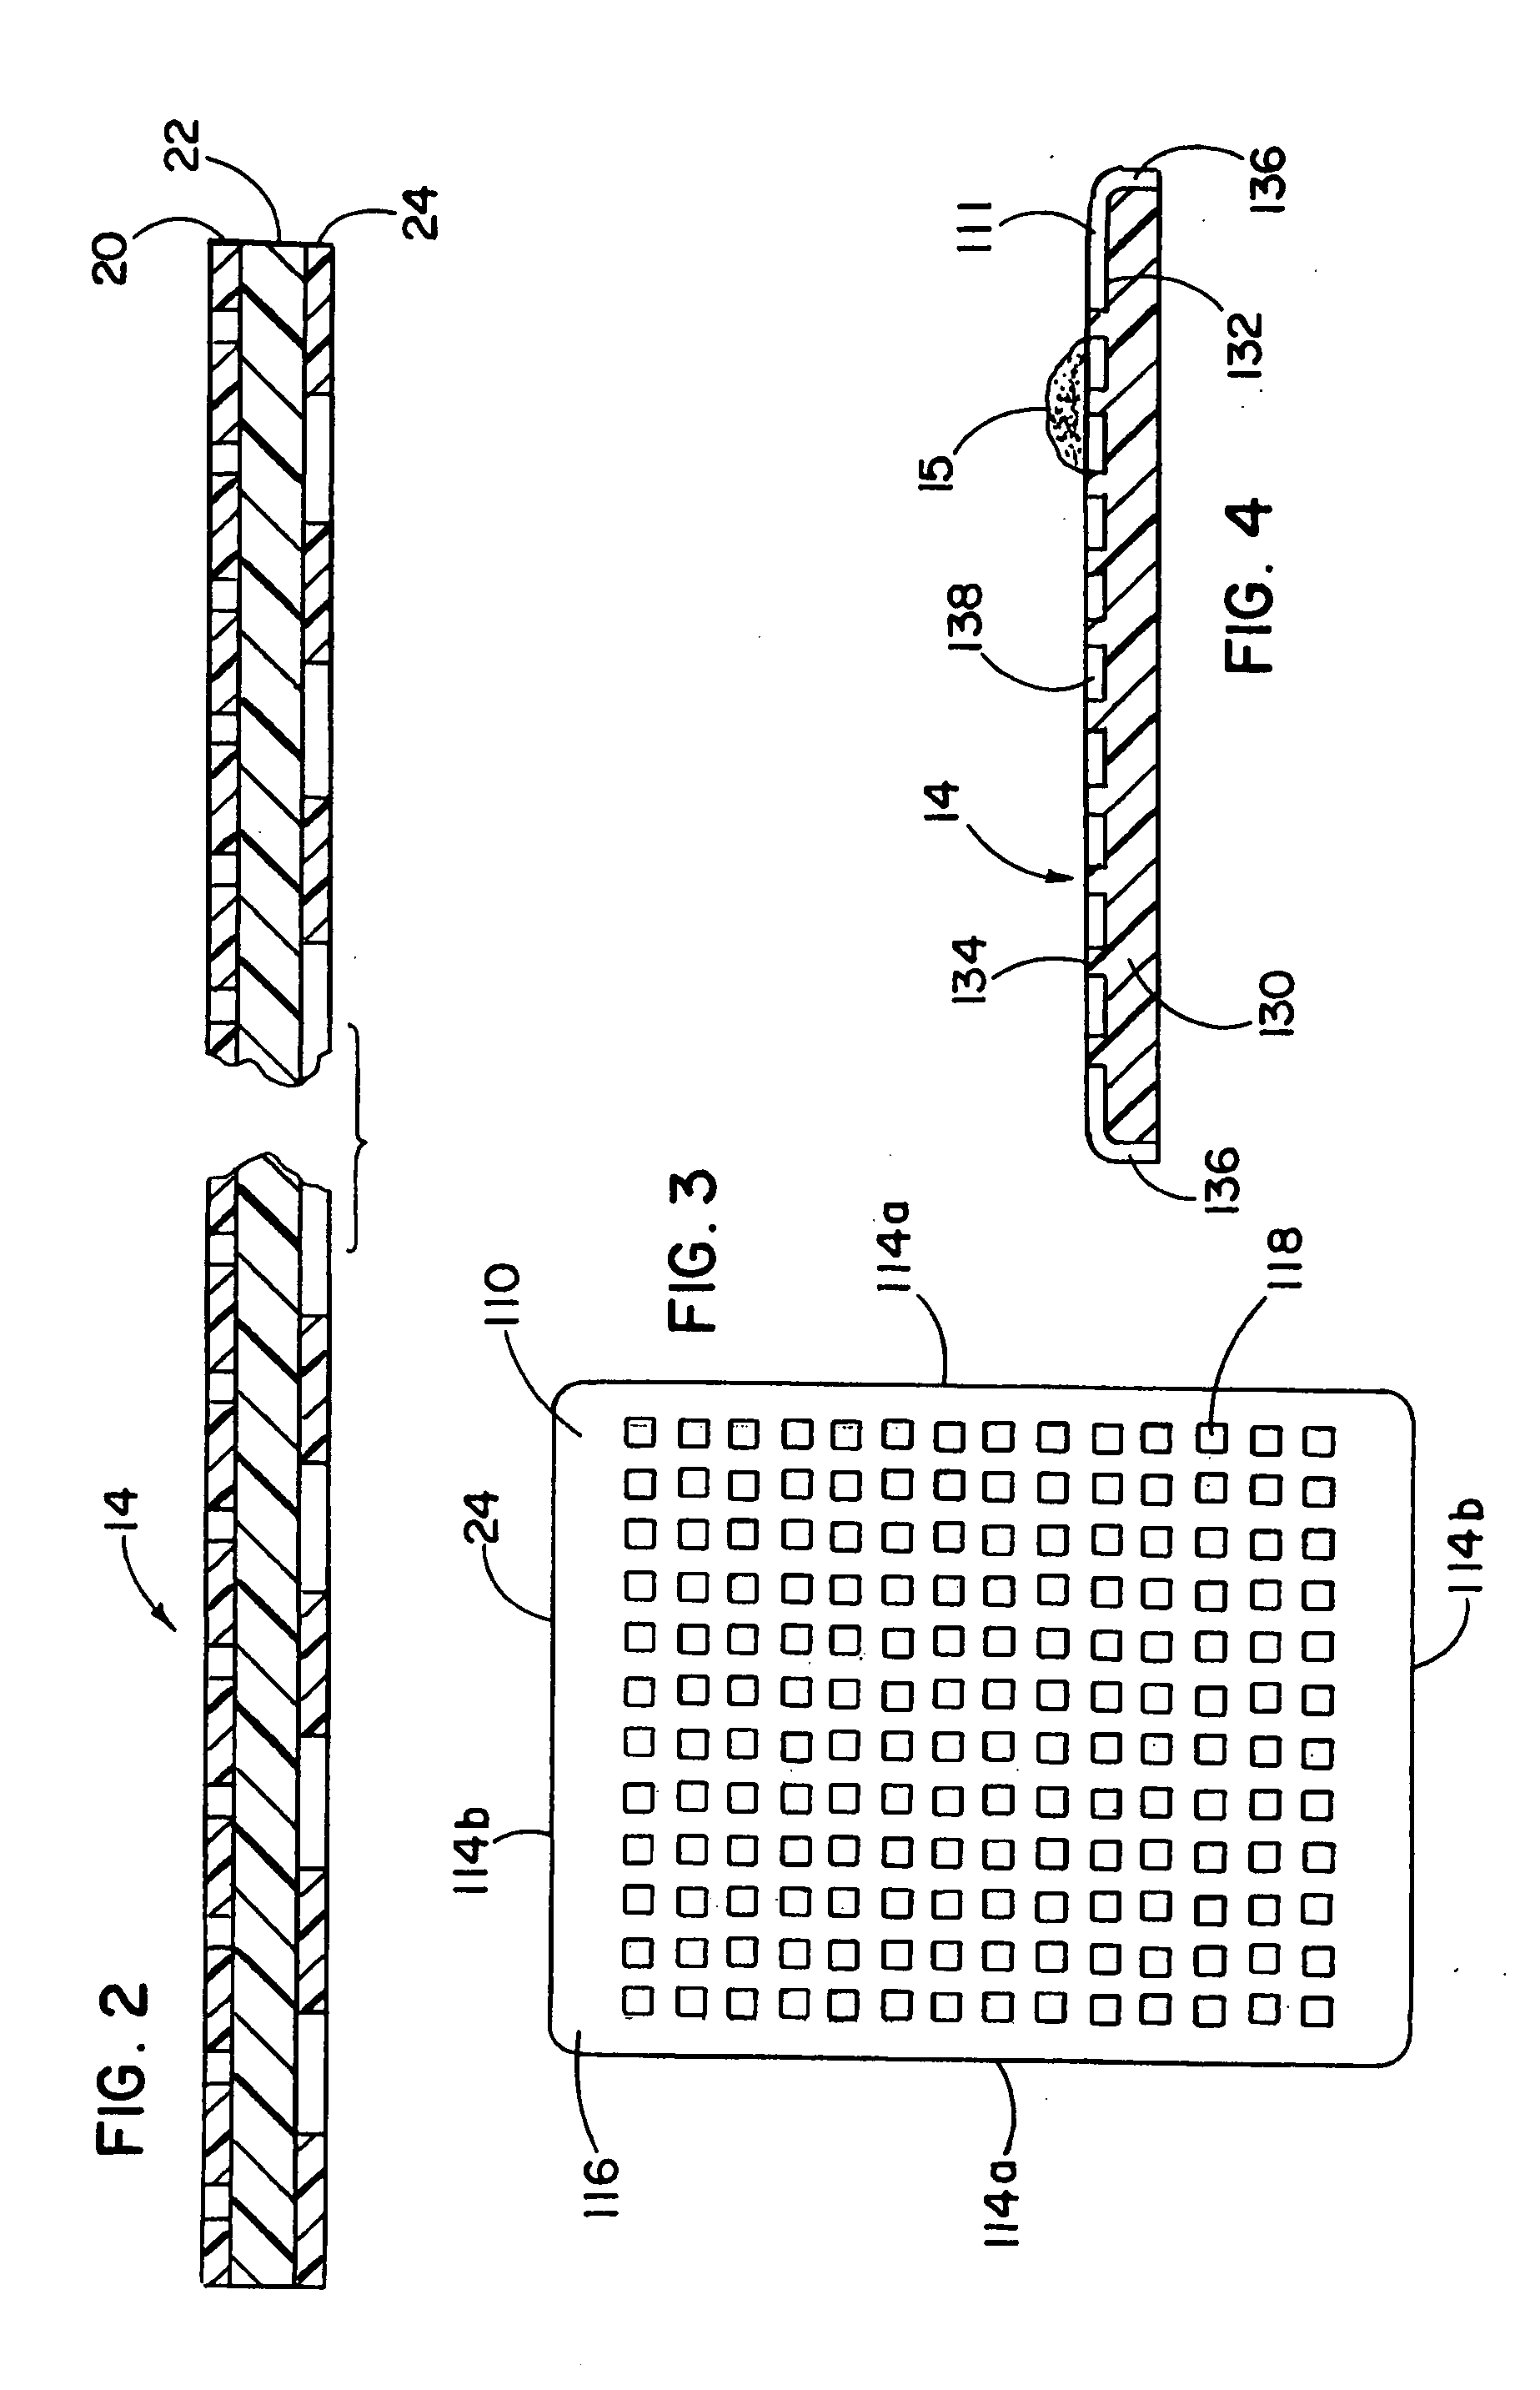 Apparatus and method for in situ processing of a tissue specimen